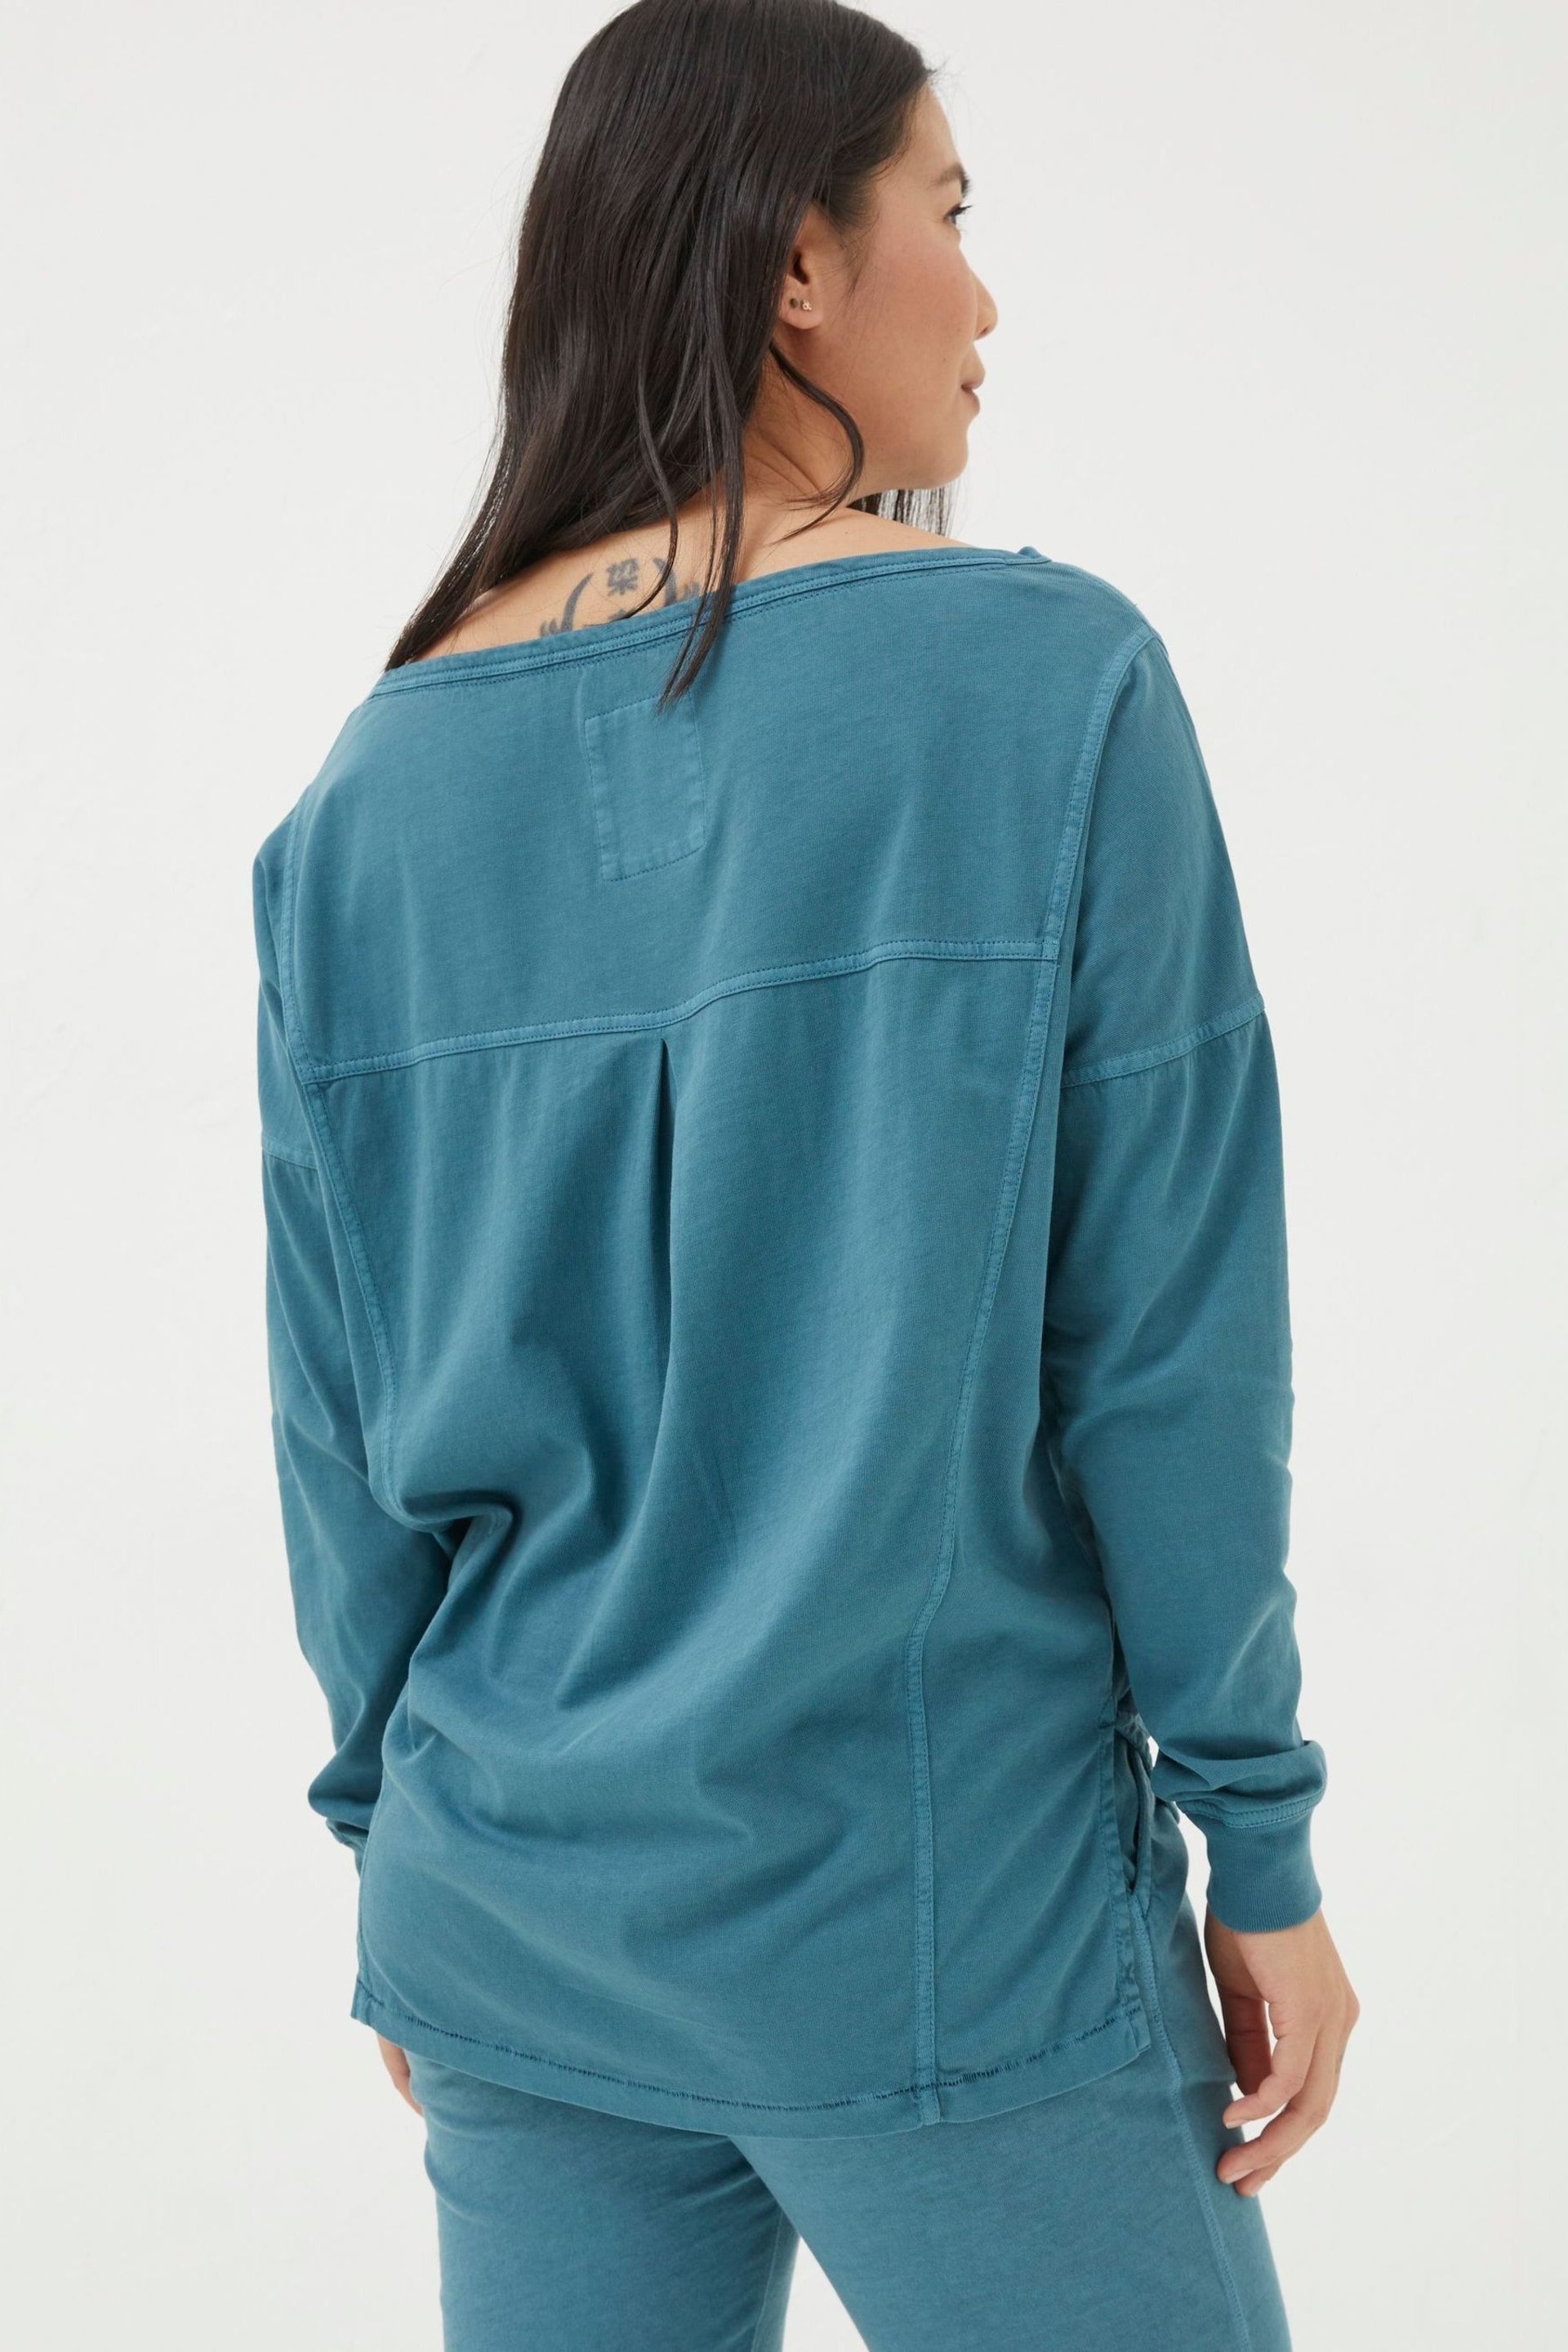 FatFace Blue Valo Tunic Top - Image 3 of 5